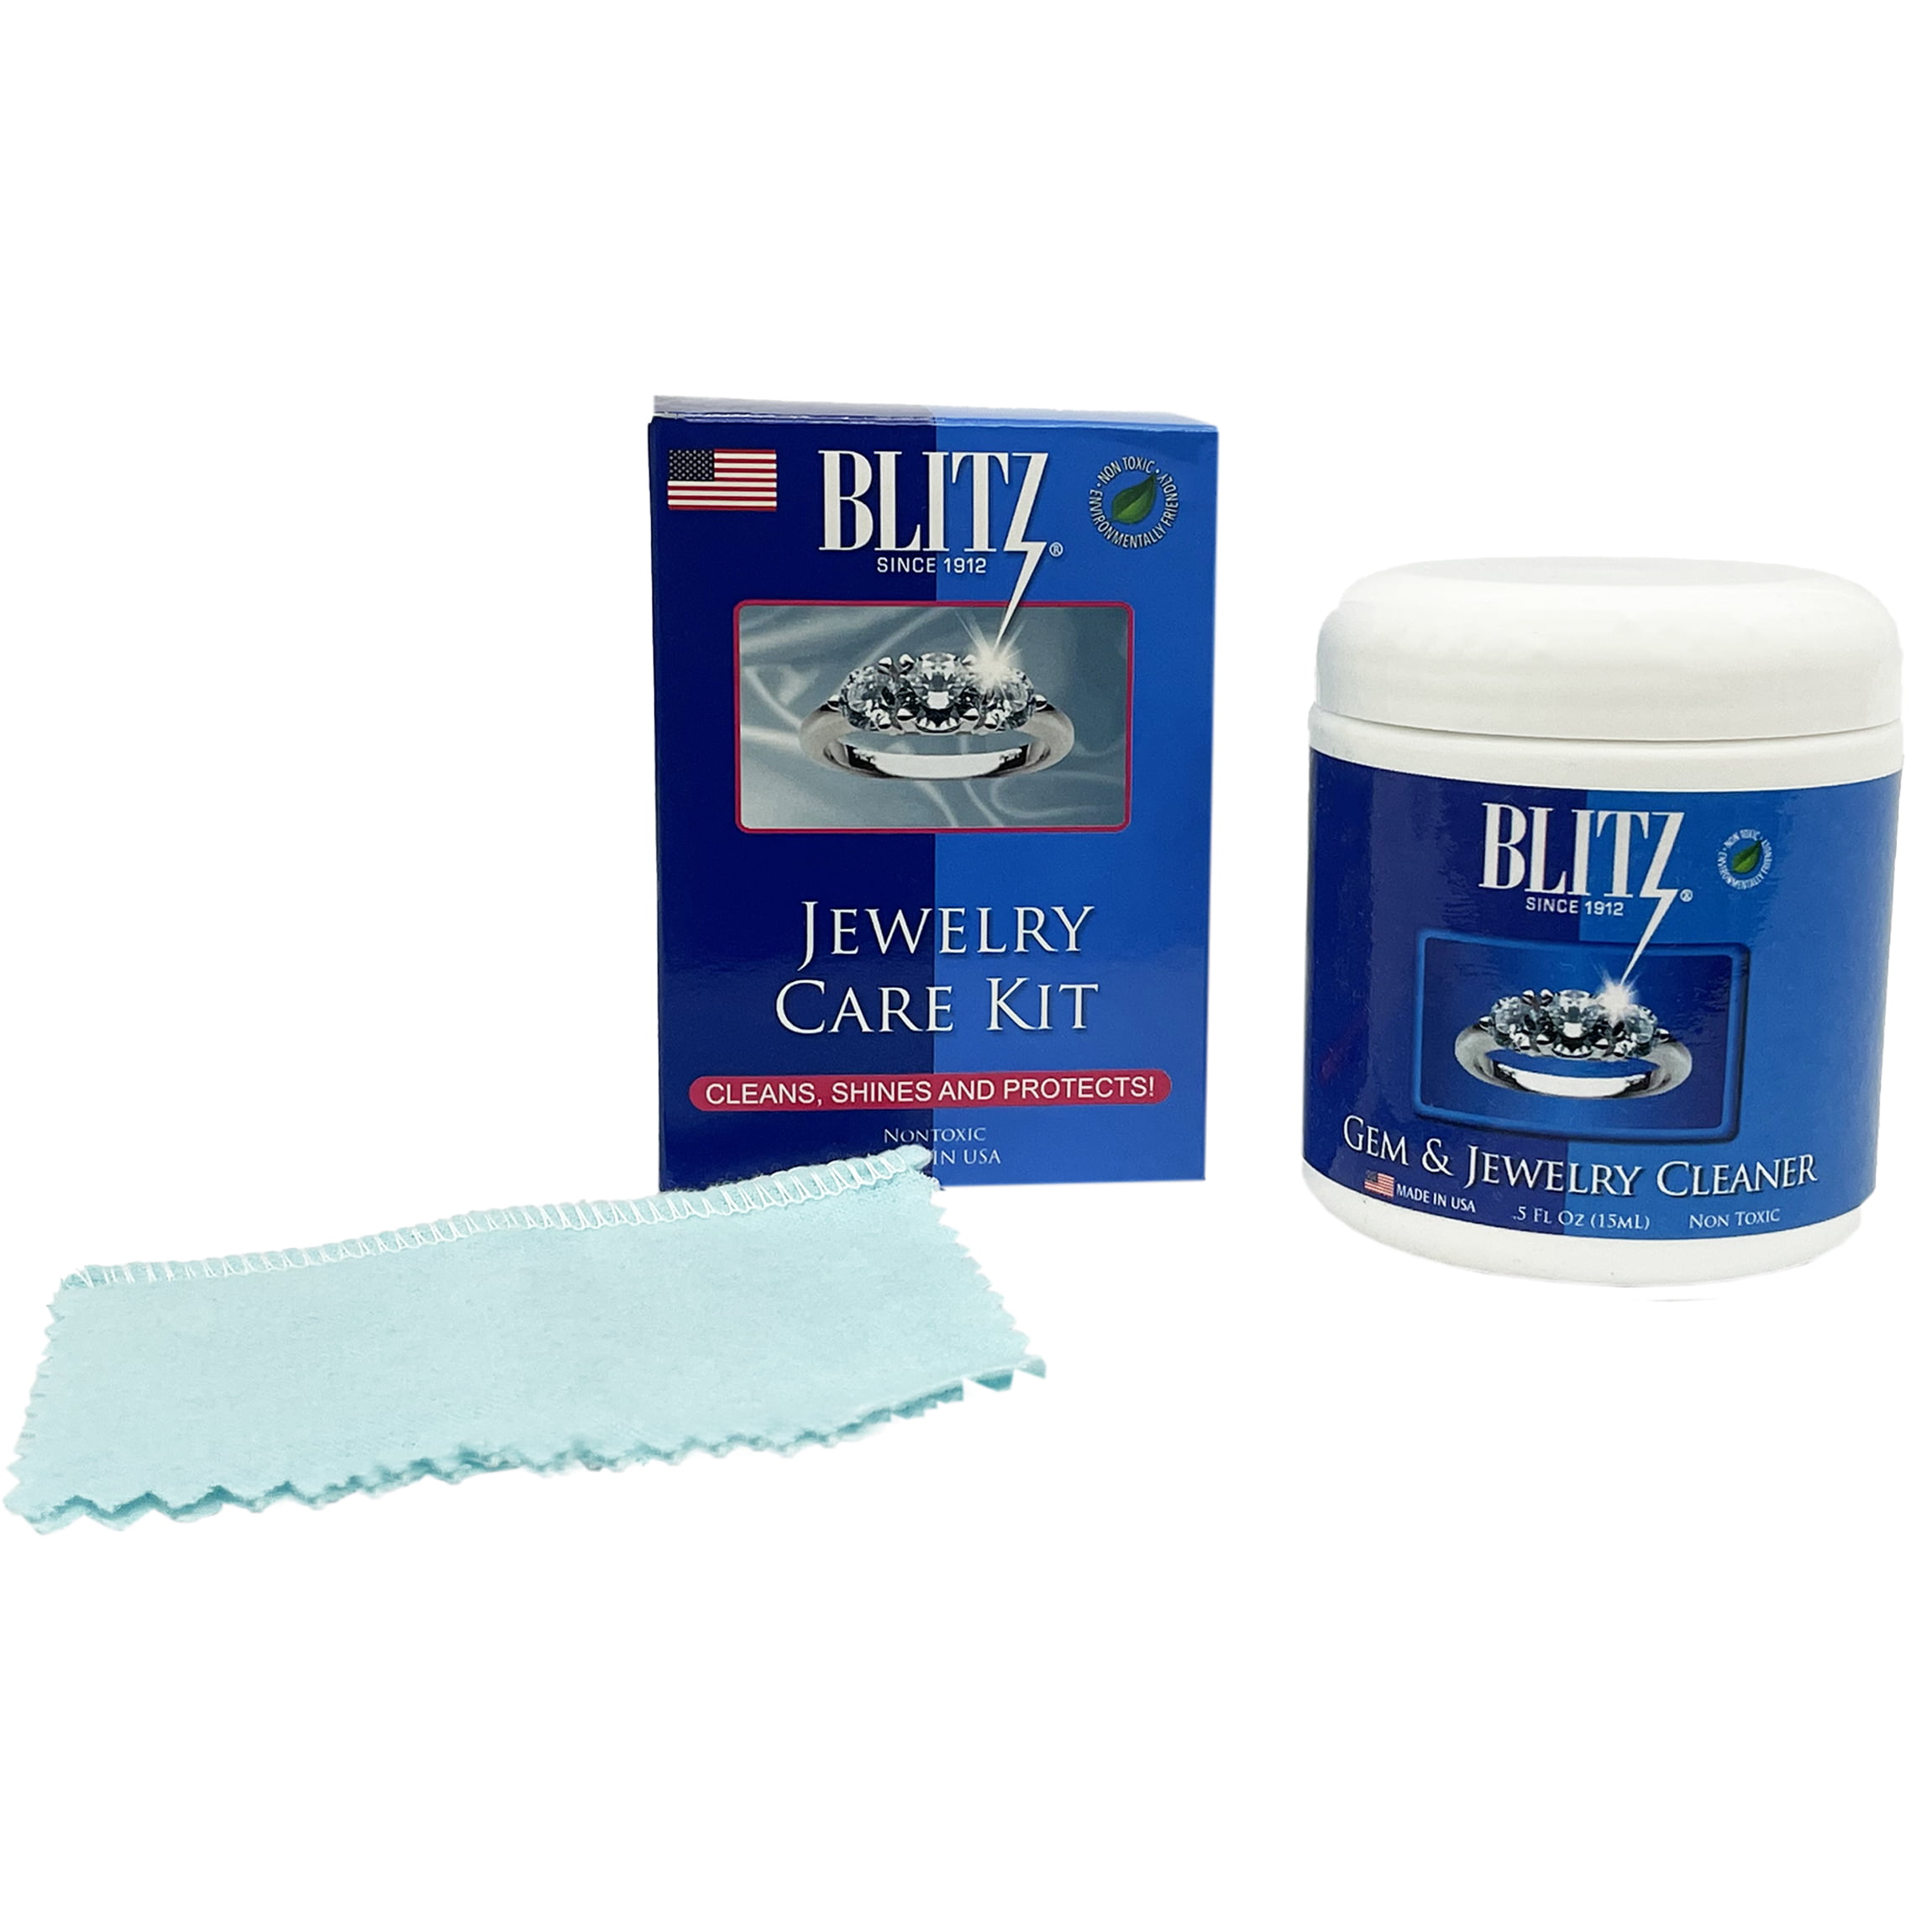 Blitz Gem & Jewelry Cleaner Concentrate (8 oz) 1-Pack